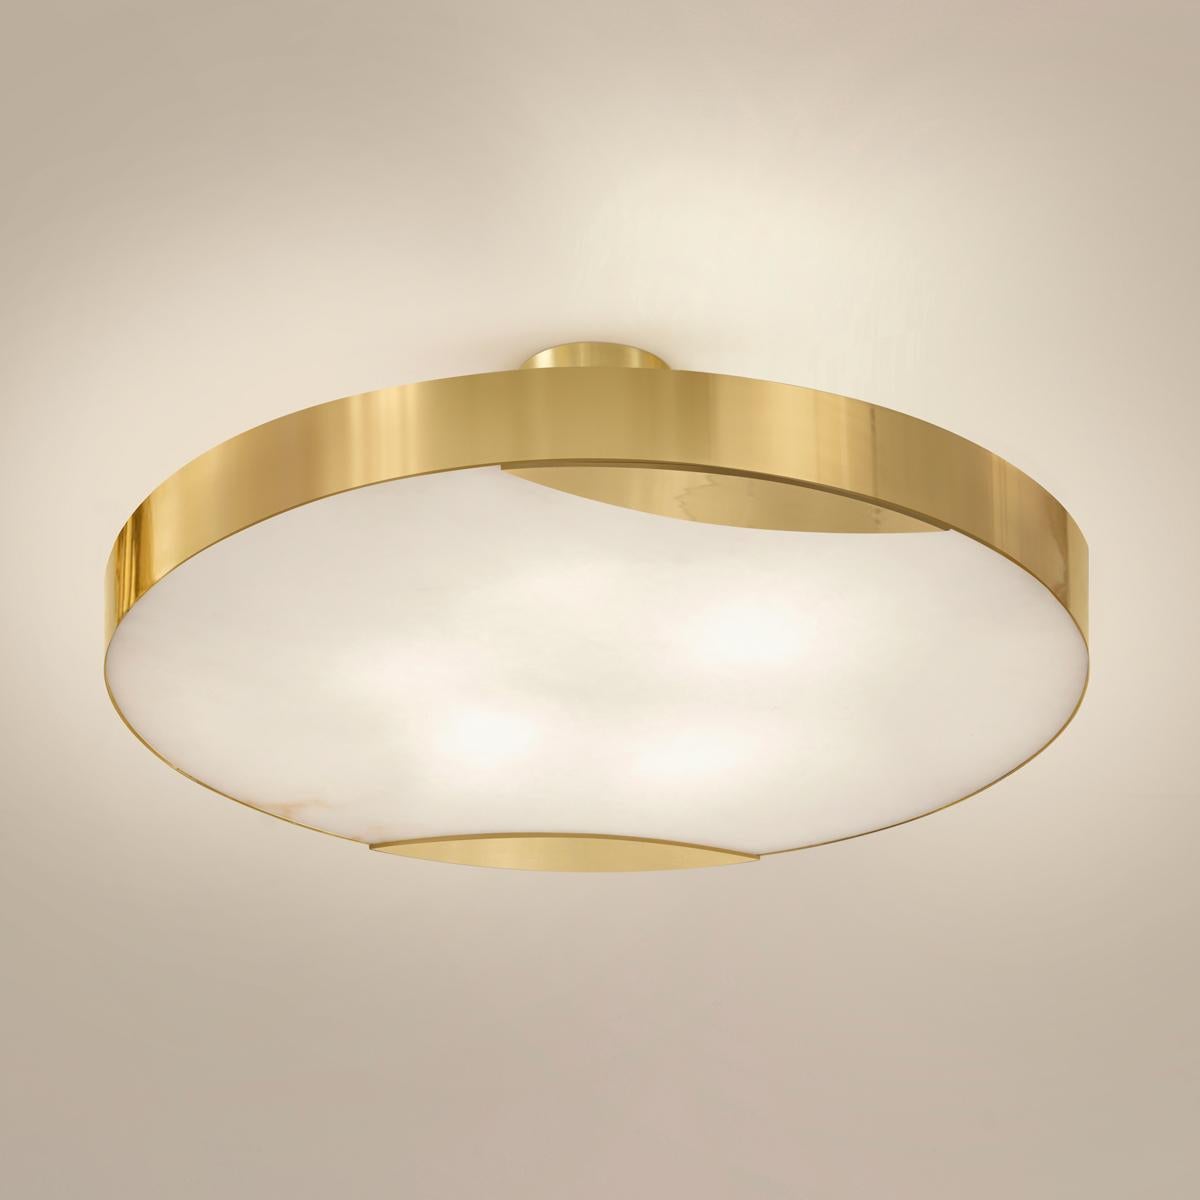 Cloud N.1 Ceiling Light by Gaspare Asaro-Peltro Finish For Sale 1